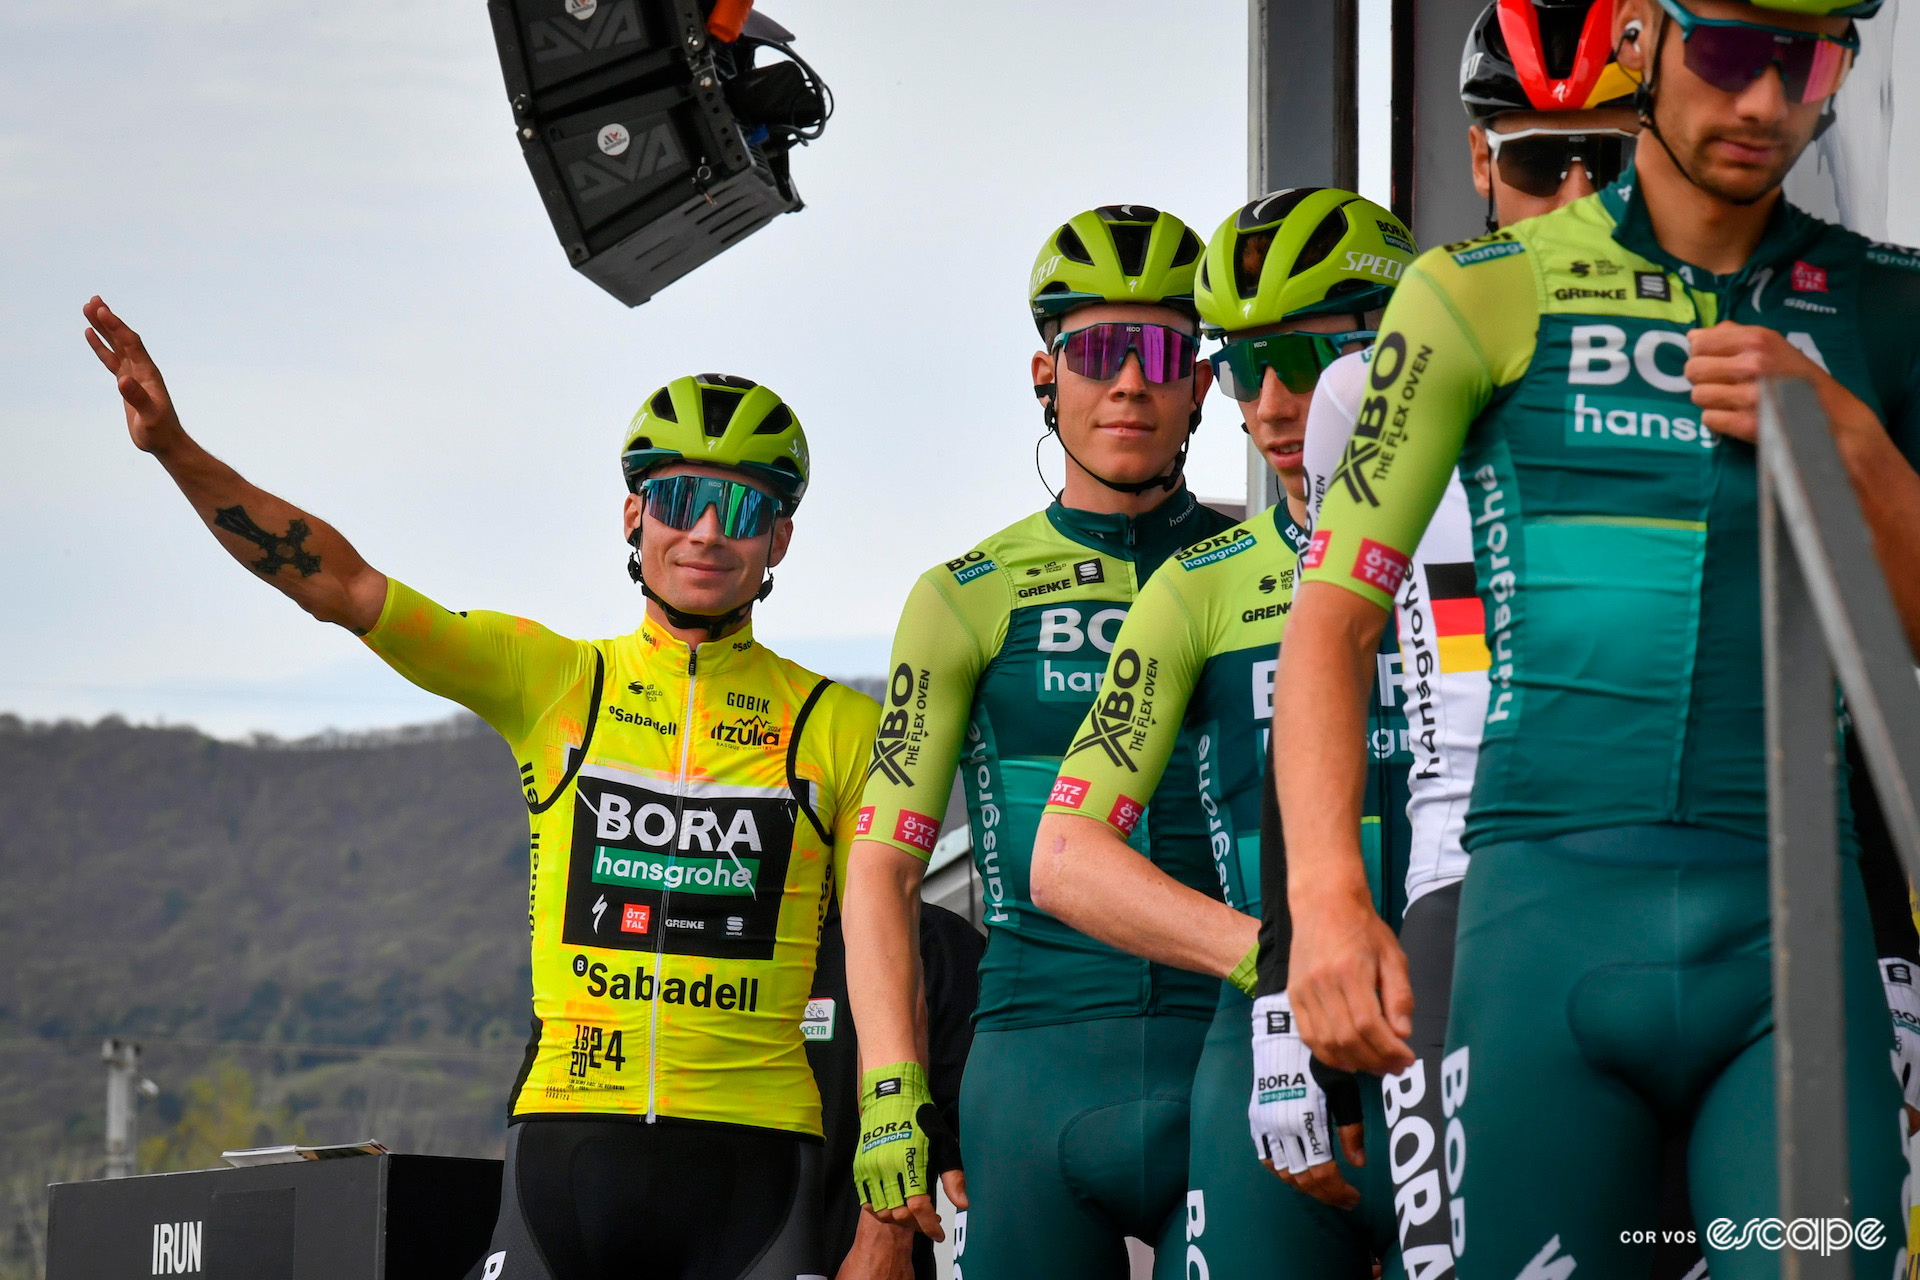 Primož Roglič in the yellow jersey waves to the crowd from the podium as his team leads the way off the stage at Itzulia Basque Country.